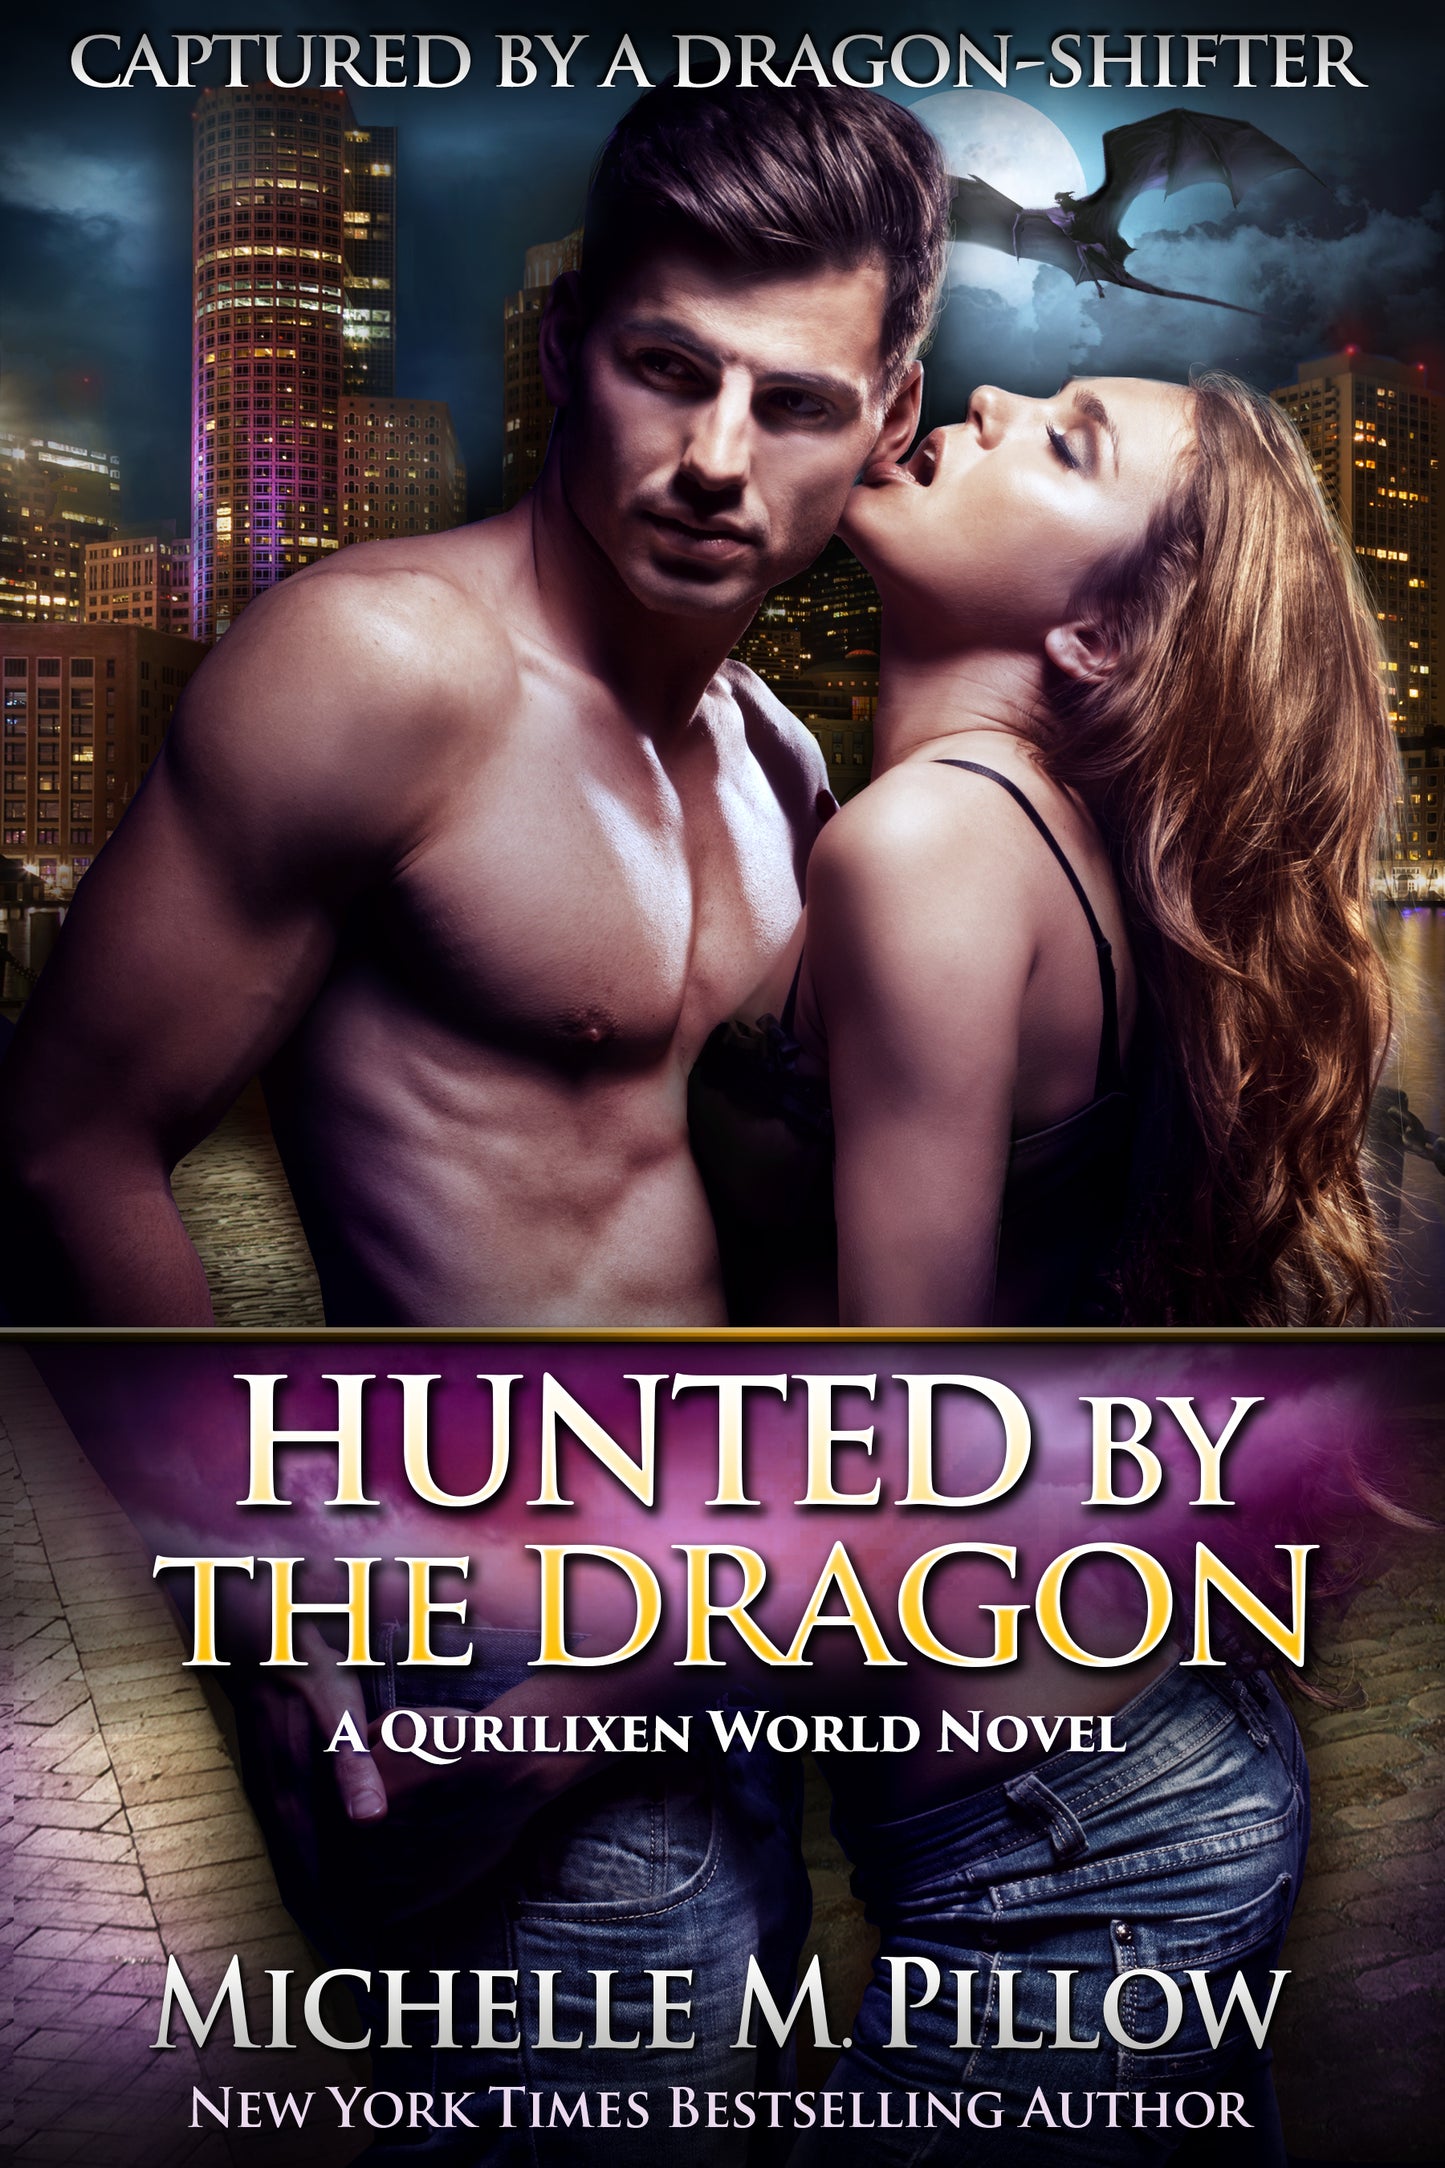 Hunted by the Dragon ebook